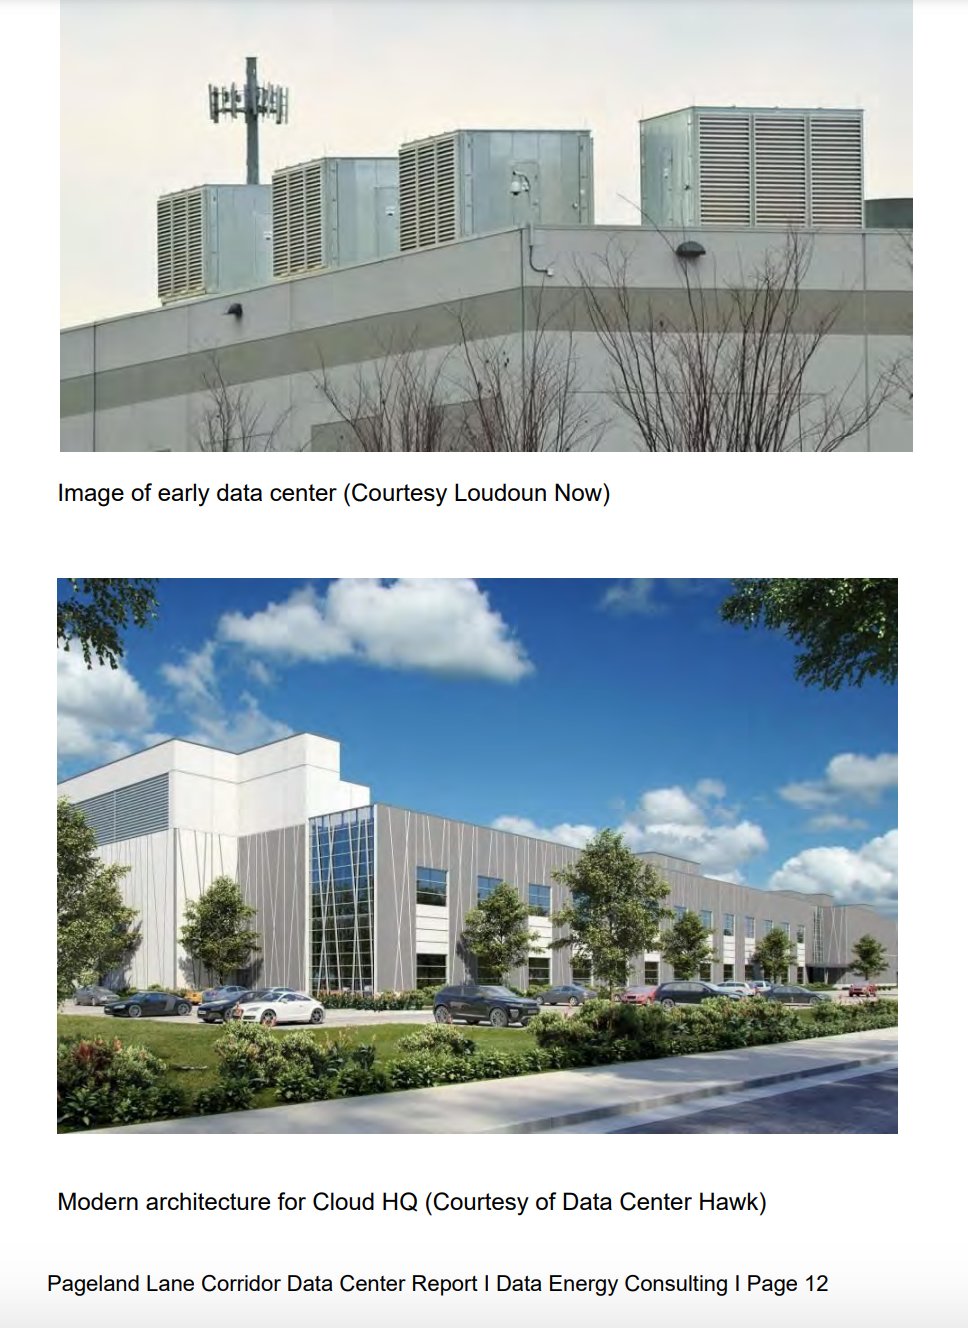 Comparison between older data centers and new designs.